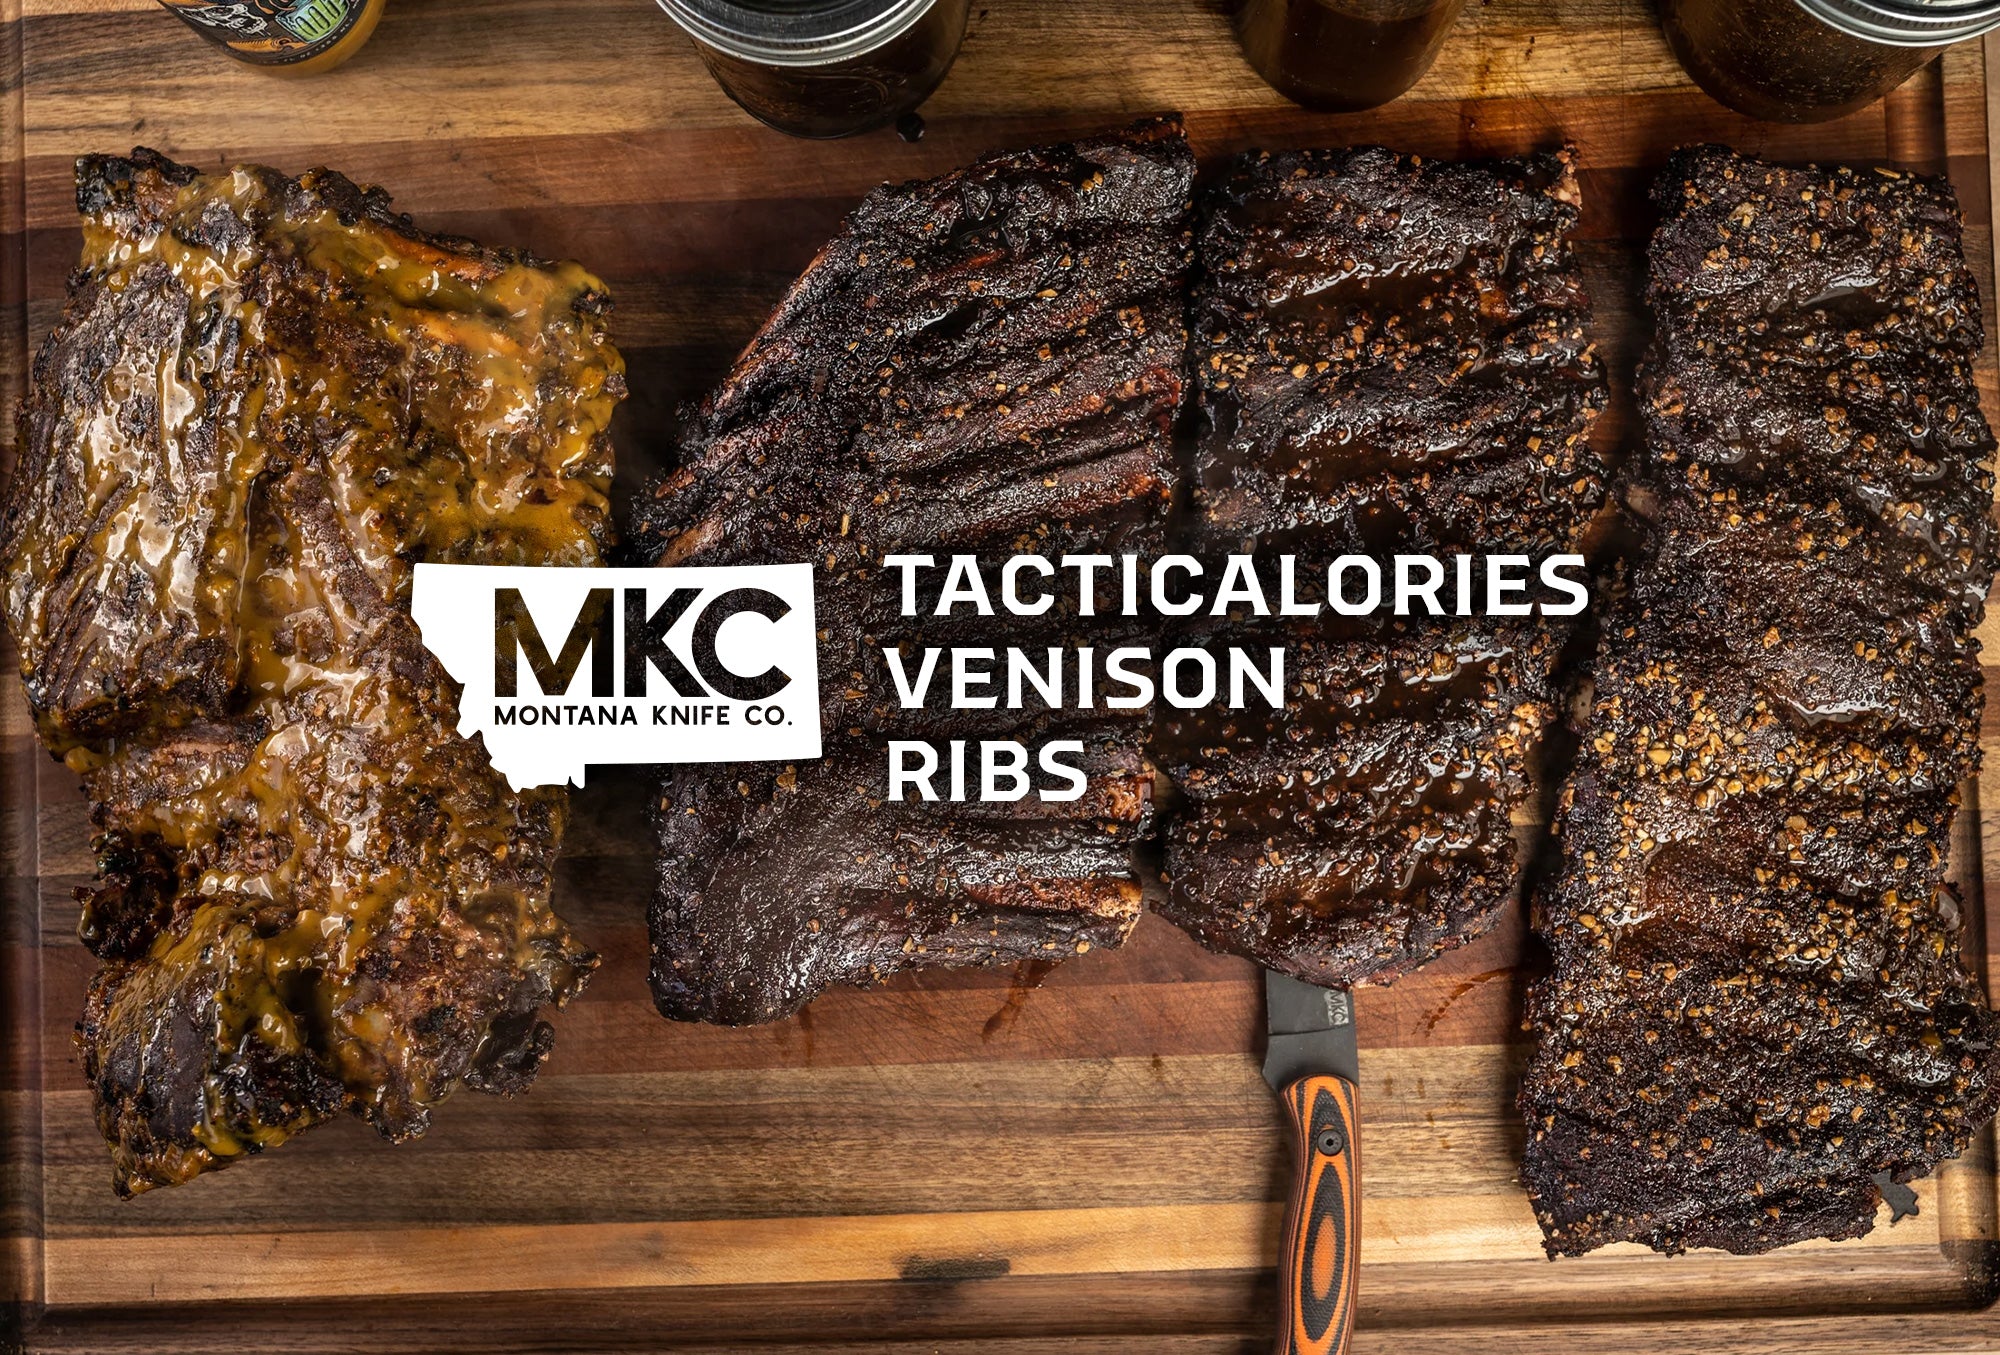 Venison ribs rest on a wood cutting board with an MKC knife resting on the edge.